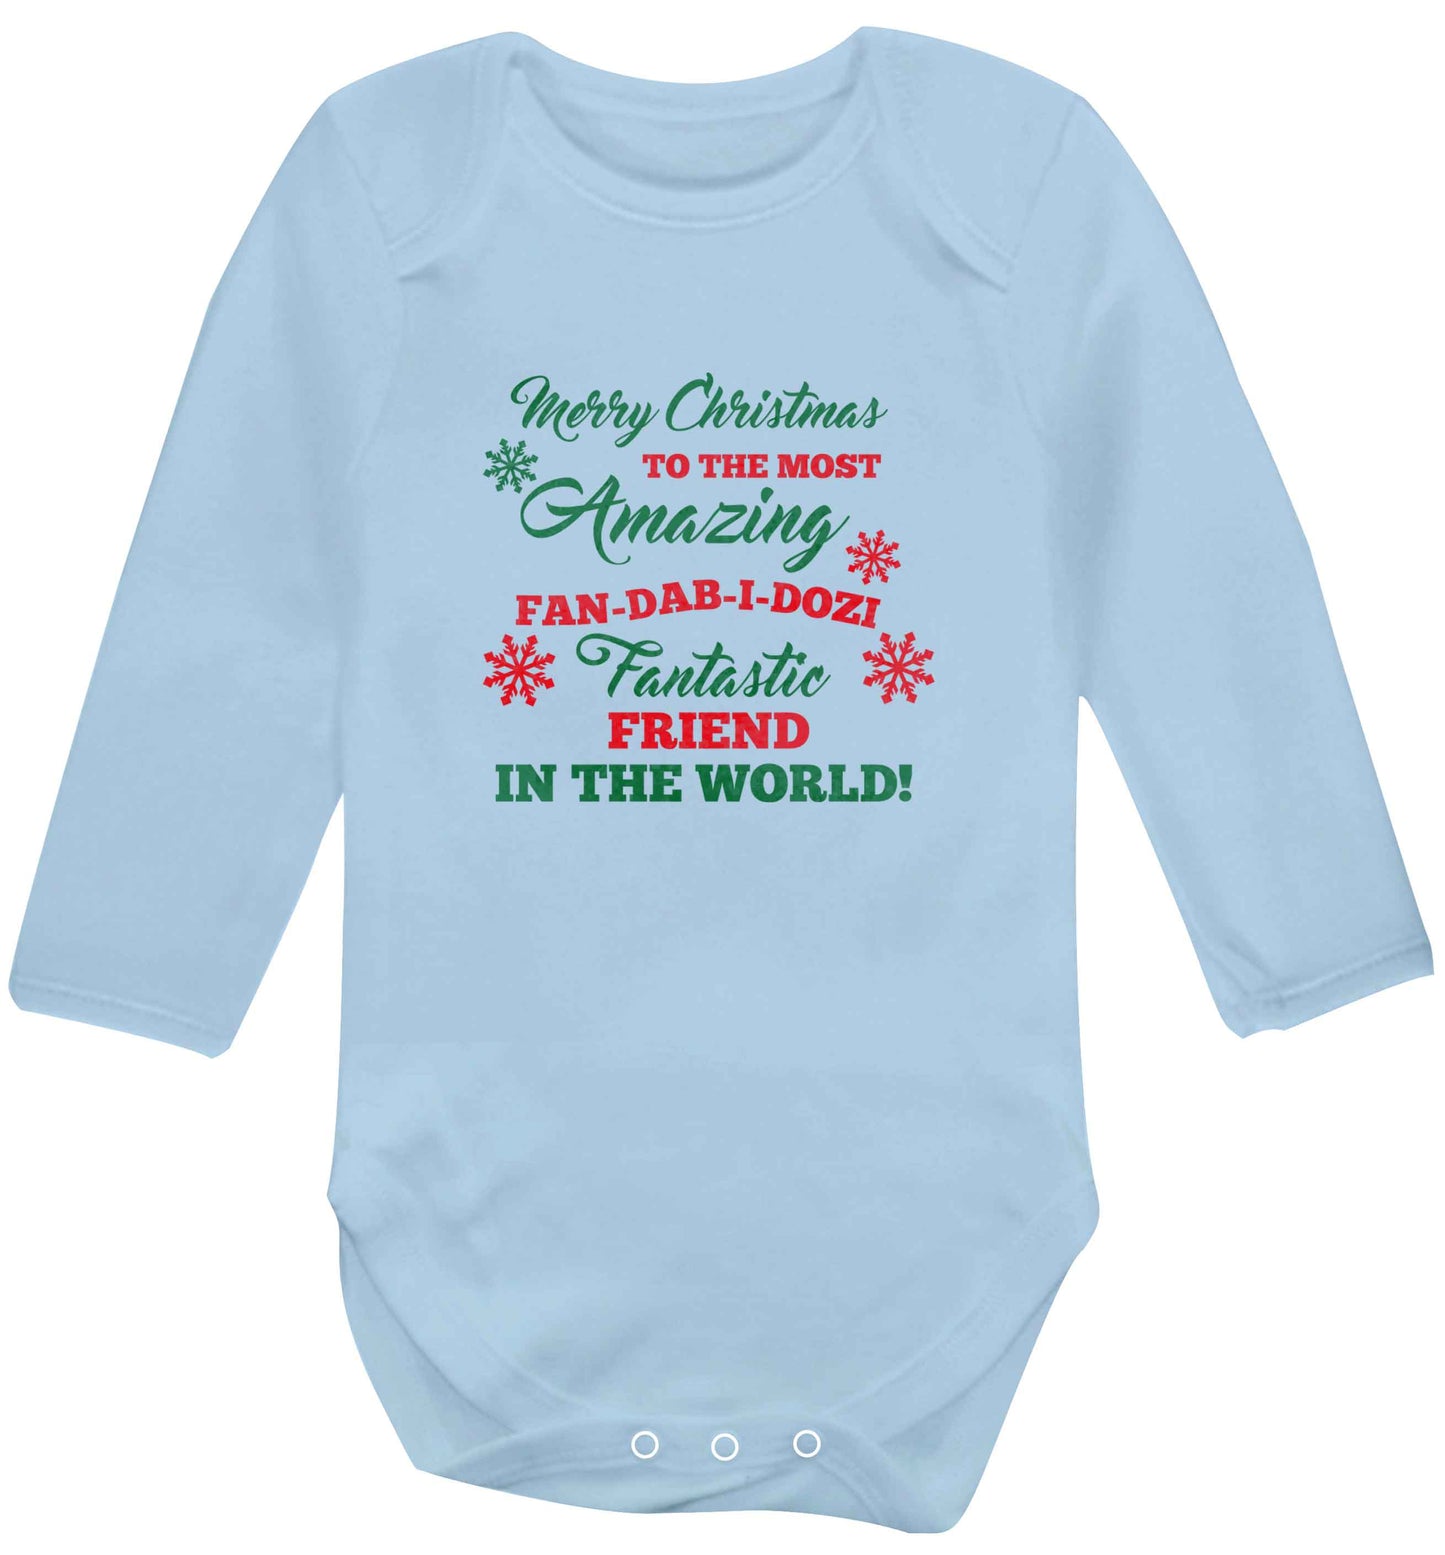 Merry Christmas to the most amazing fan-dab-i-dozi fantasic friend in the world baby vest long sleeved pale blue 6-12 months